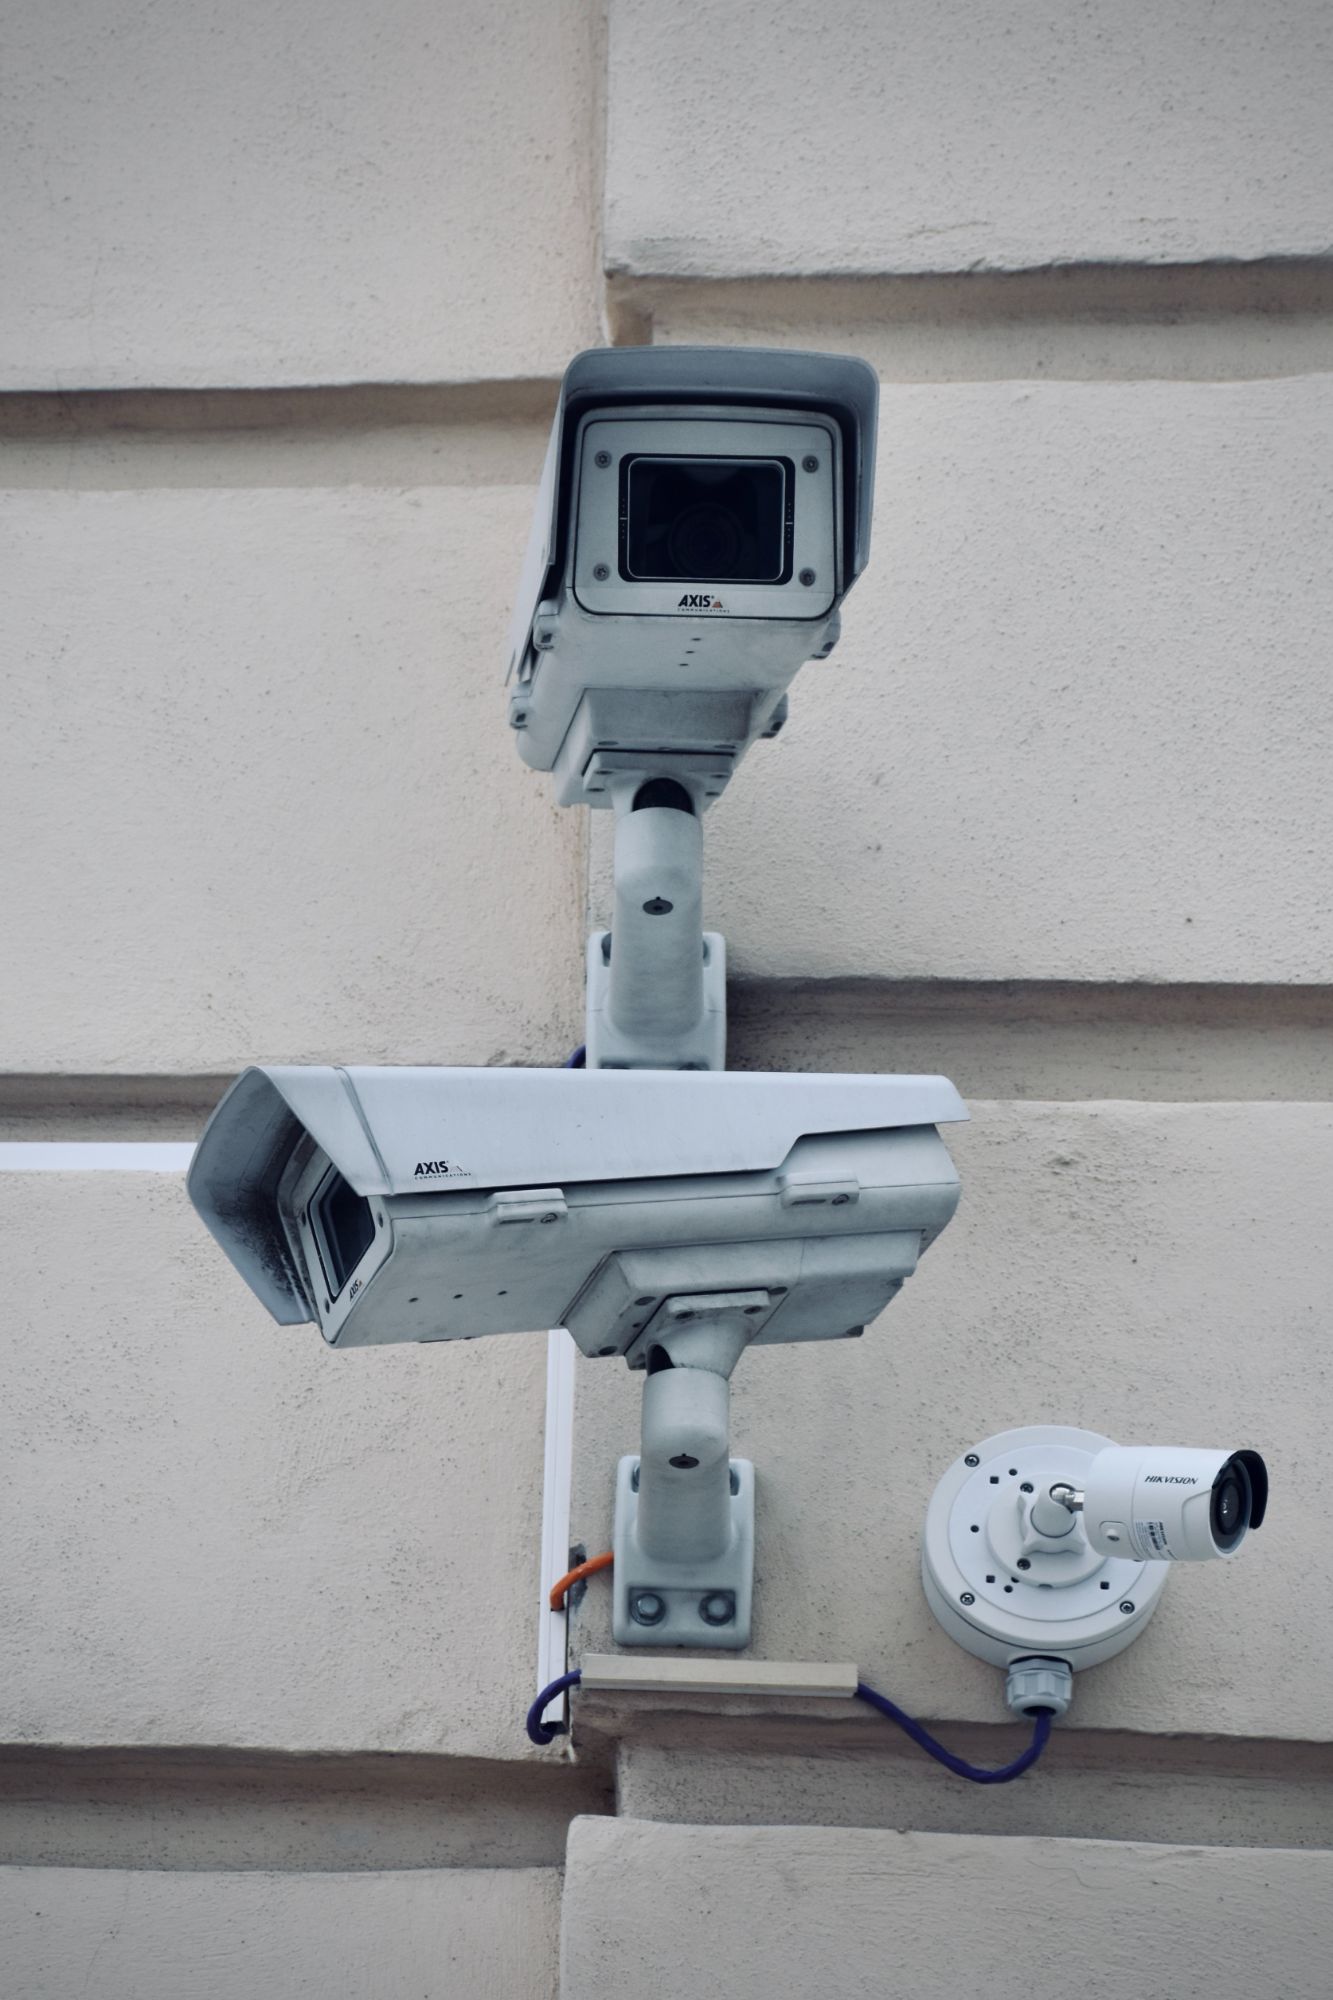 cctv cameras providing intelligence to by analysed by analysts in a team.